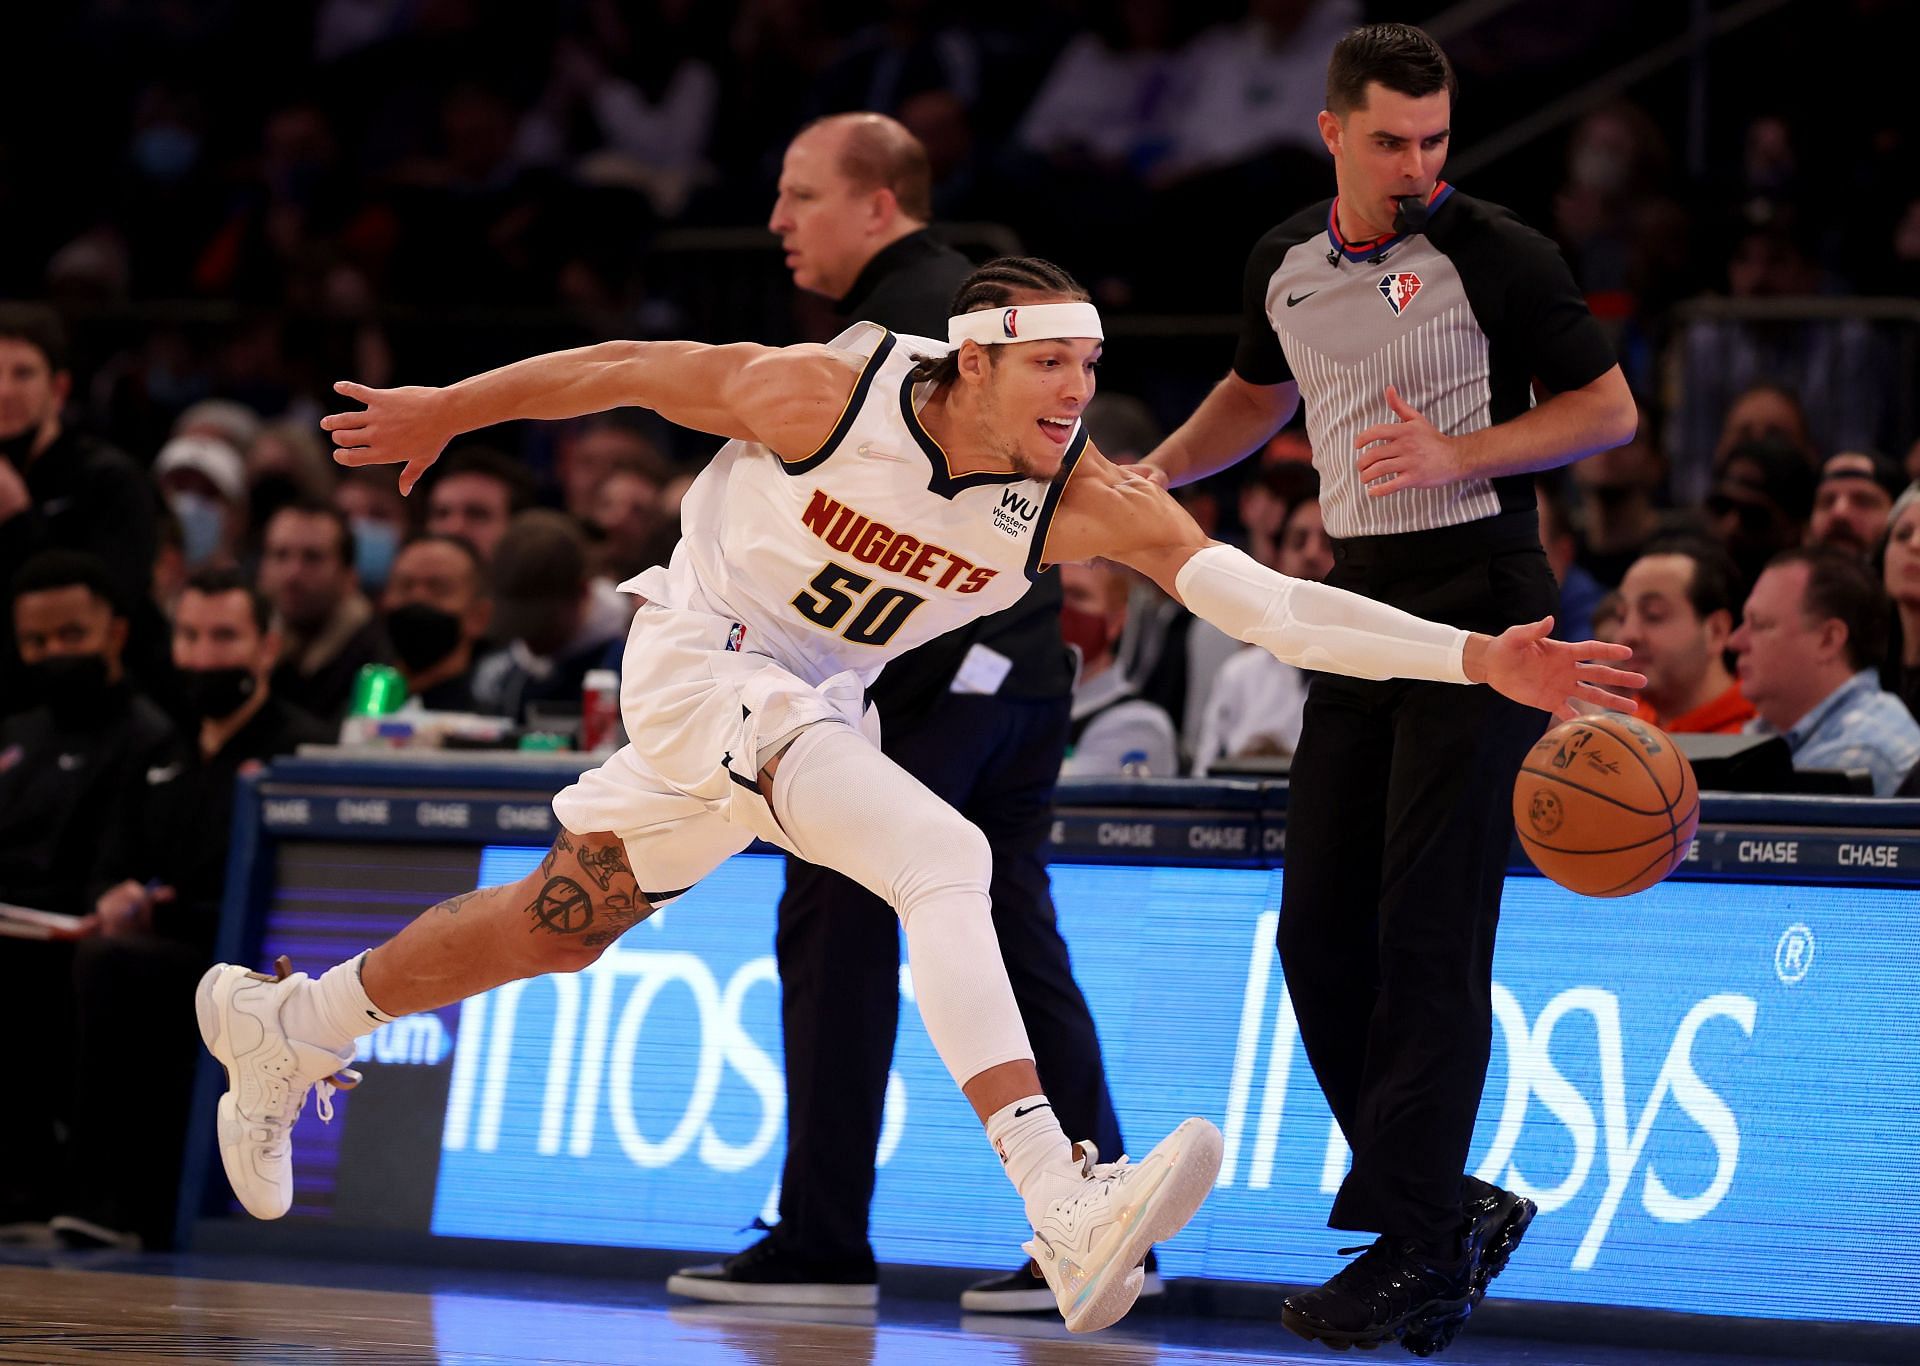 Aaron Gordon of the Denver Nuggets hustles to keep possession of a loose ball